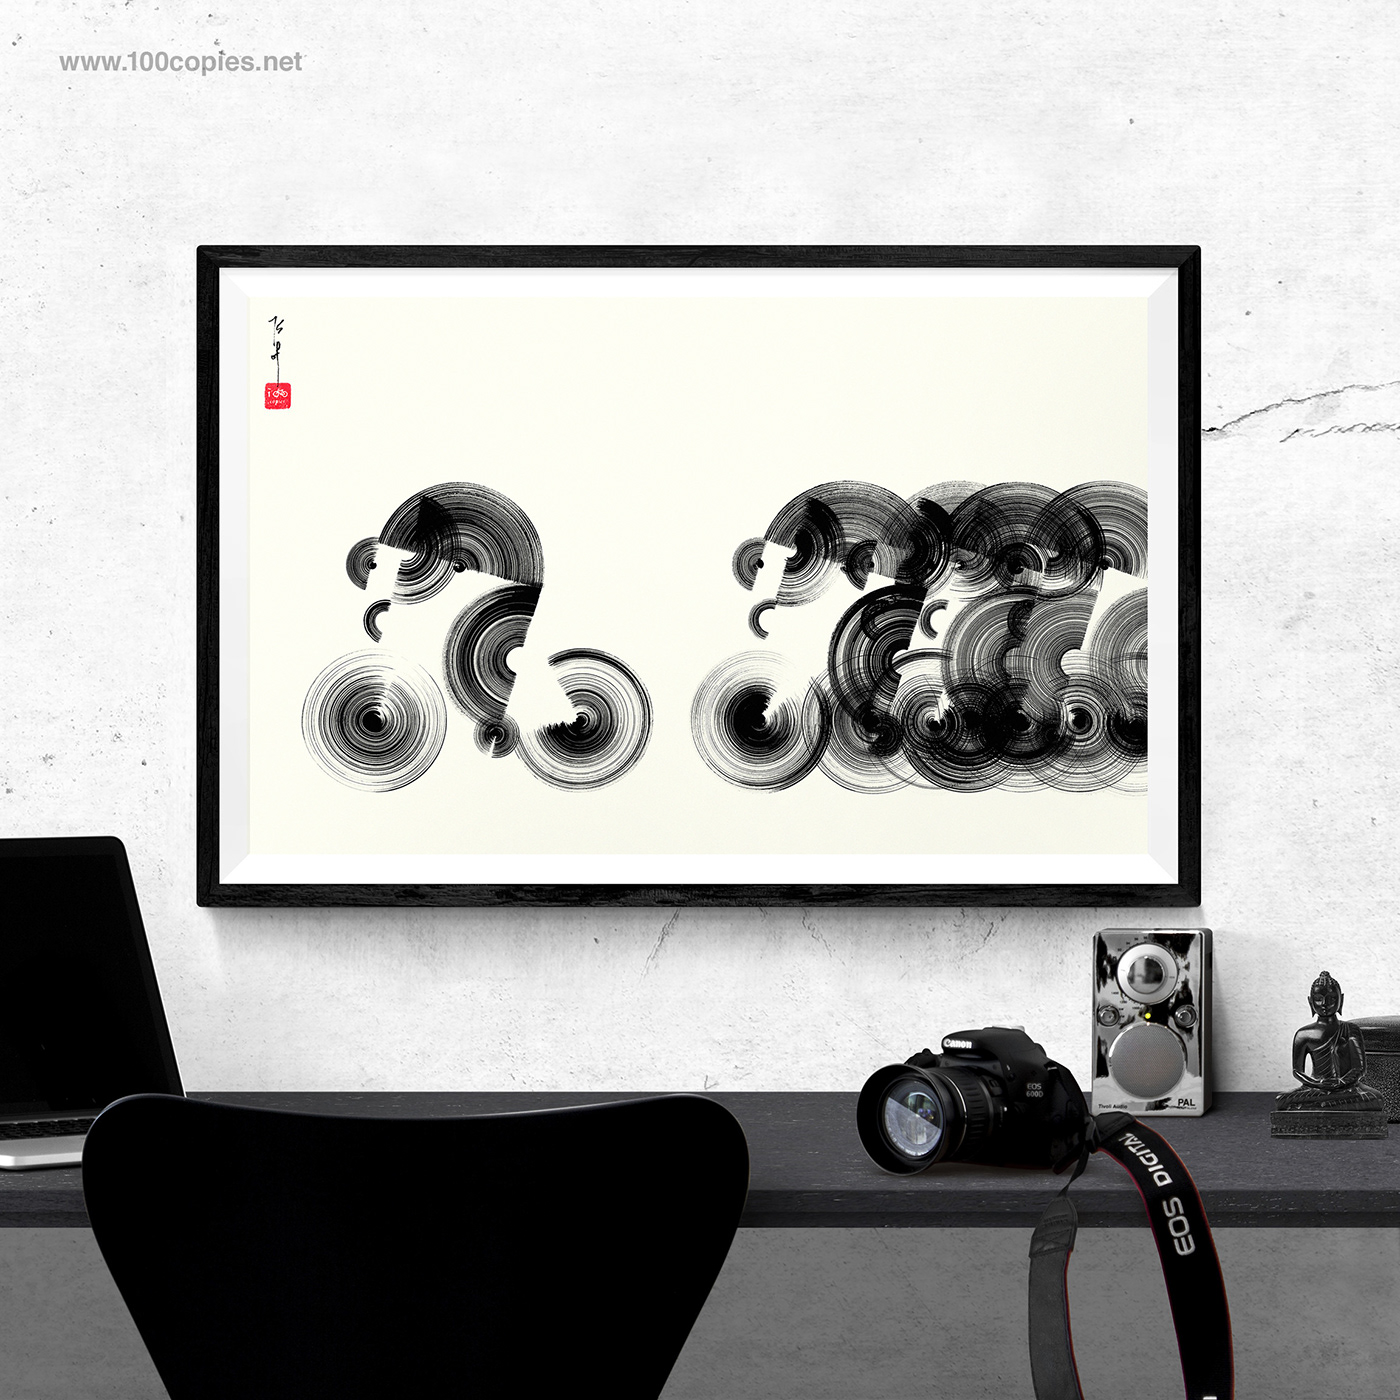 Bicycle bicycle art limited edition 100 Copies Chinese painting thomas yang singapore home decor Cycling cycling art